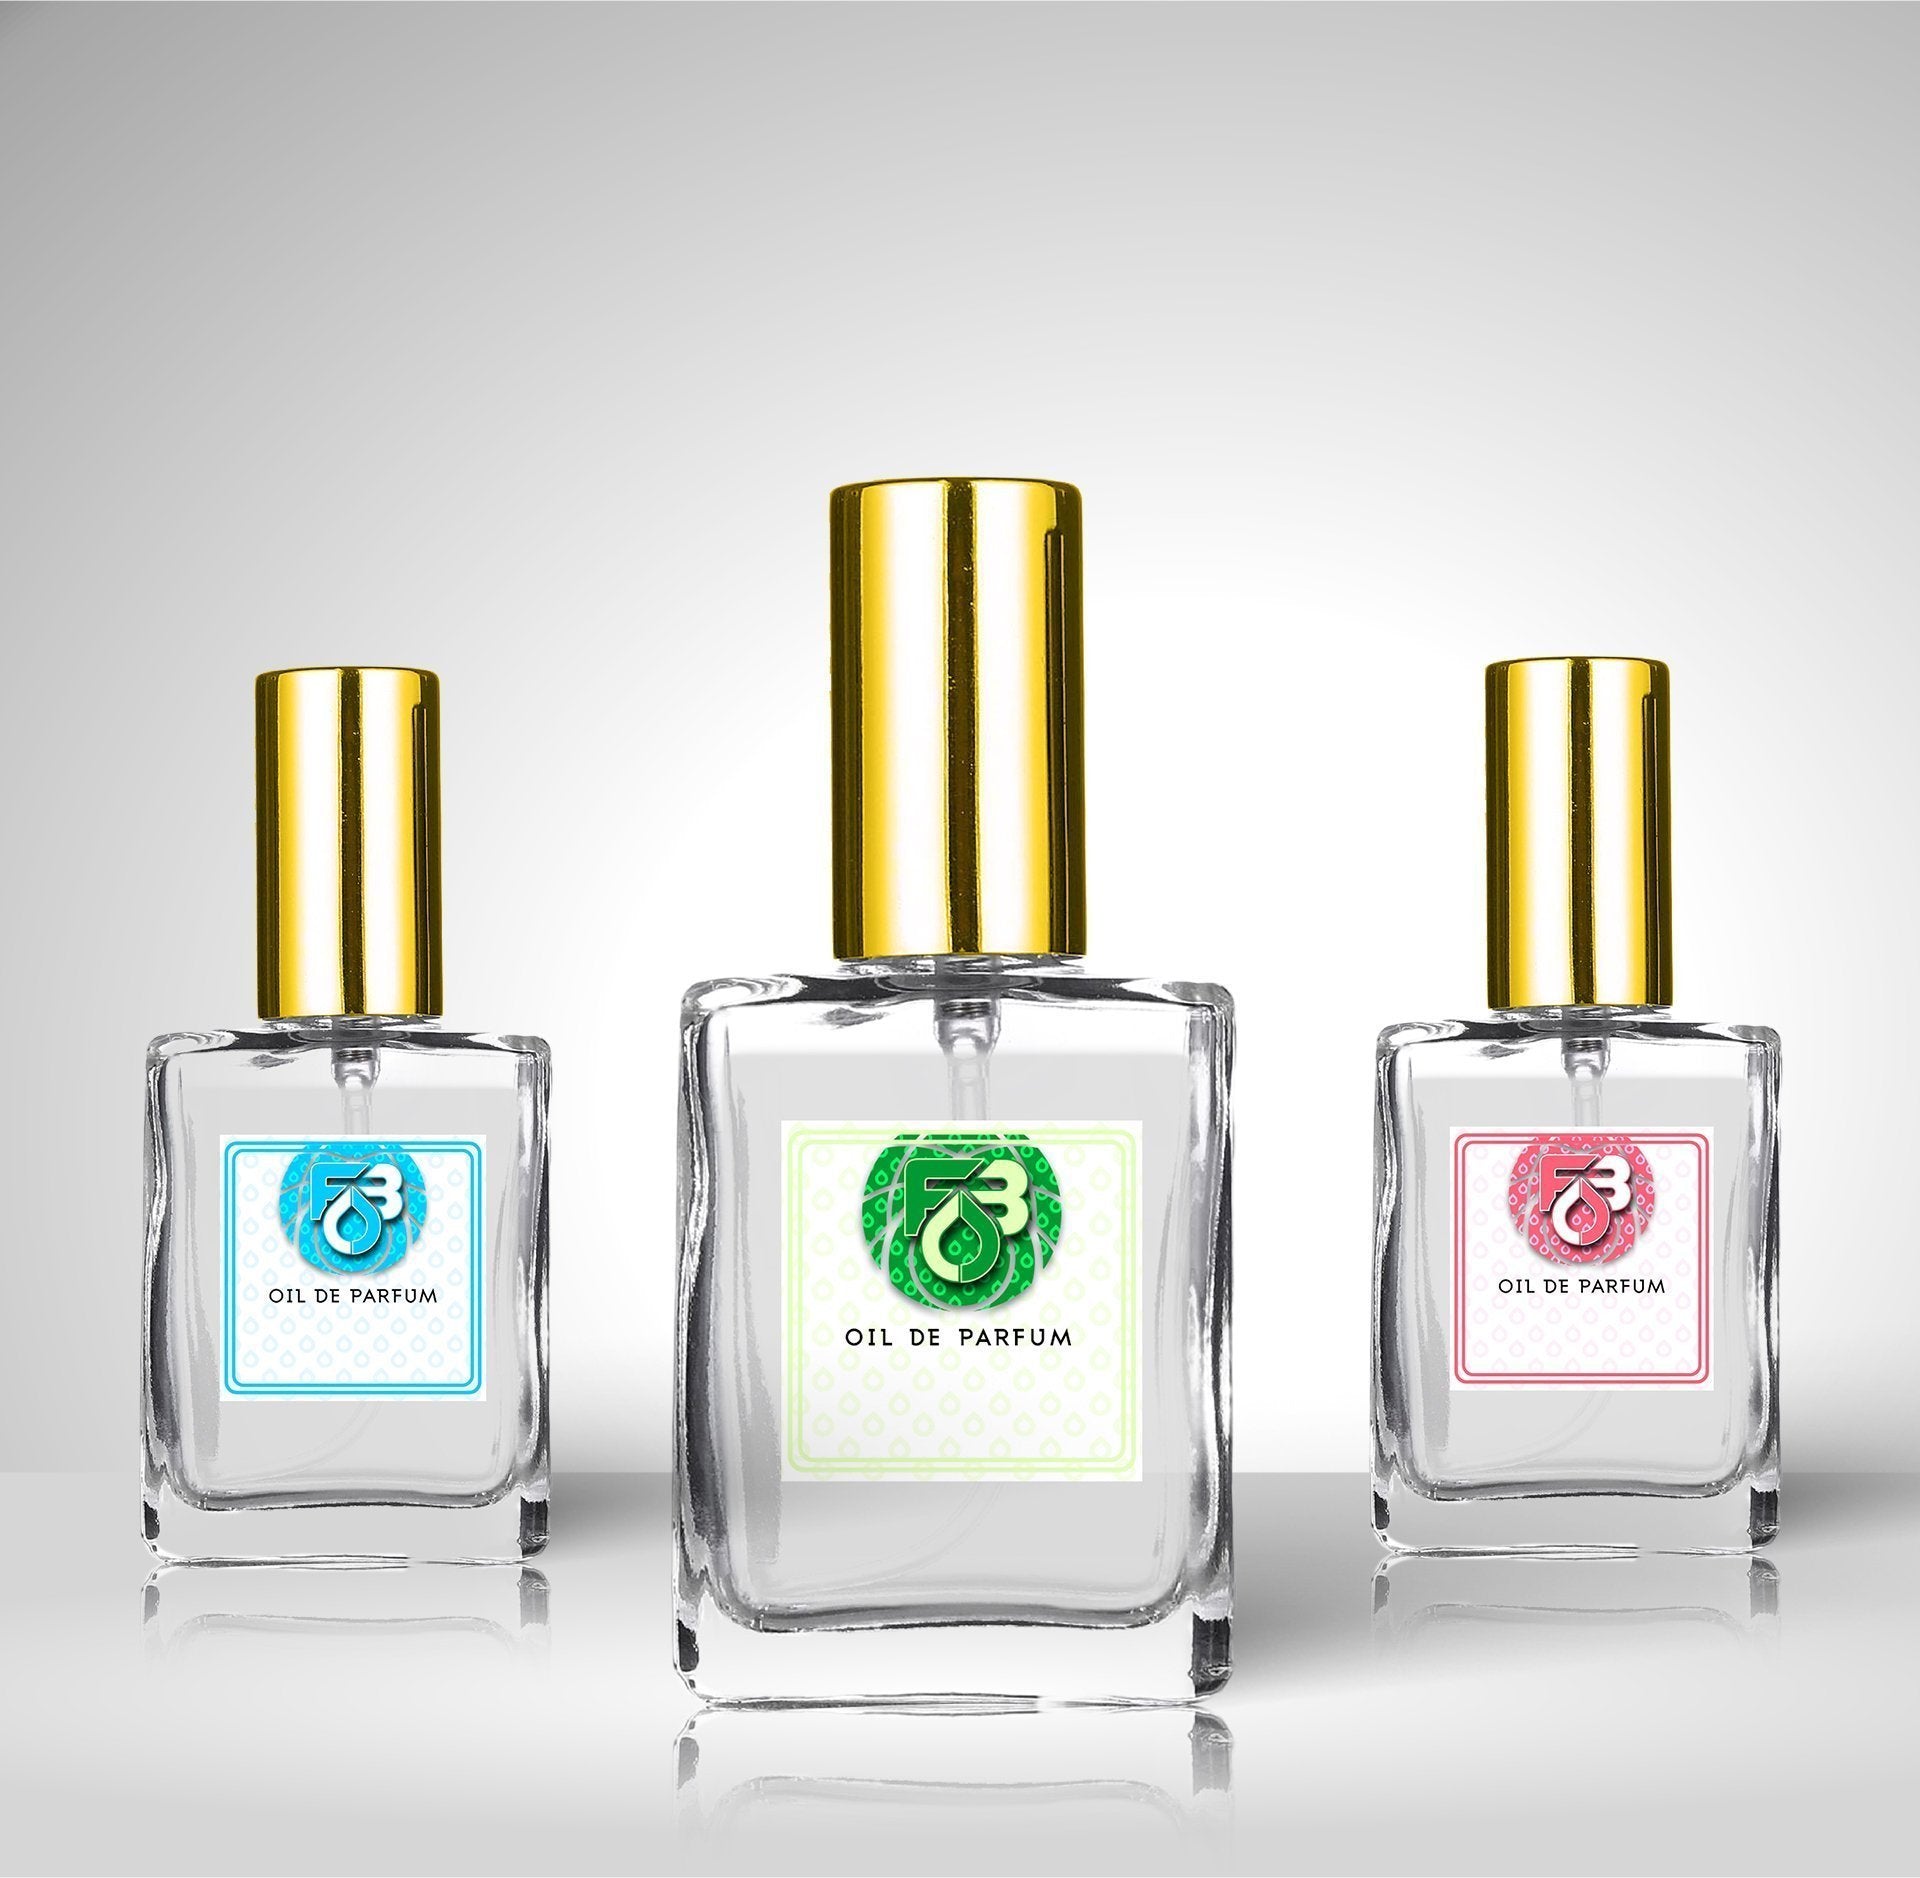 Compare Aroma to The One for Women®